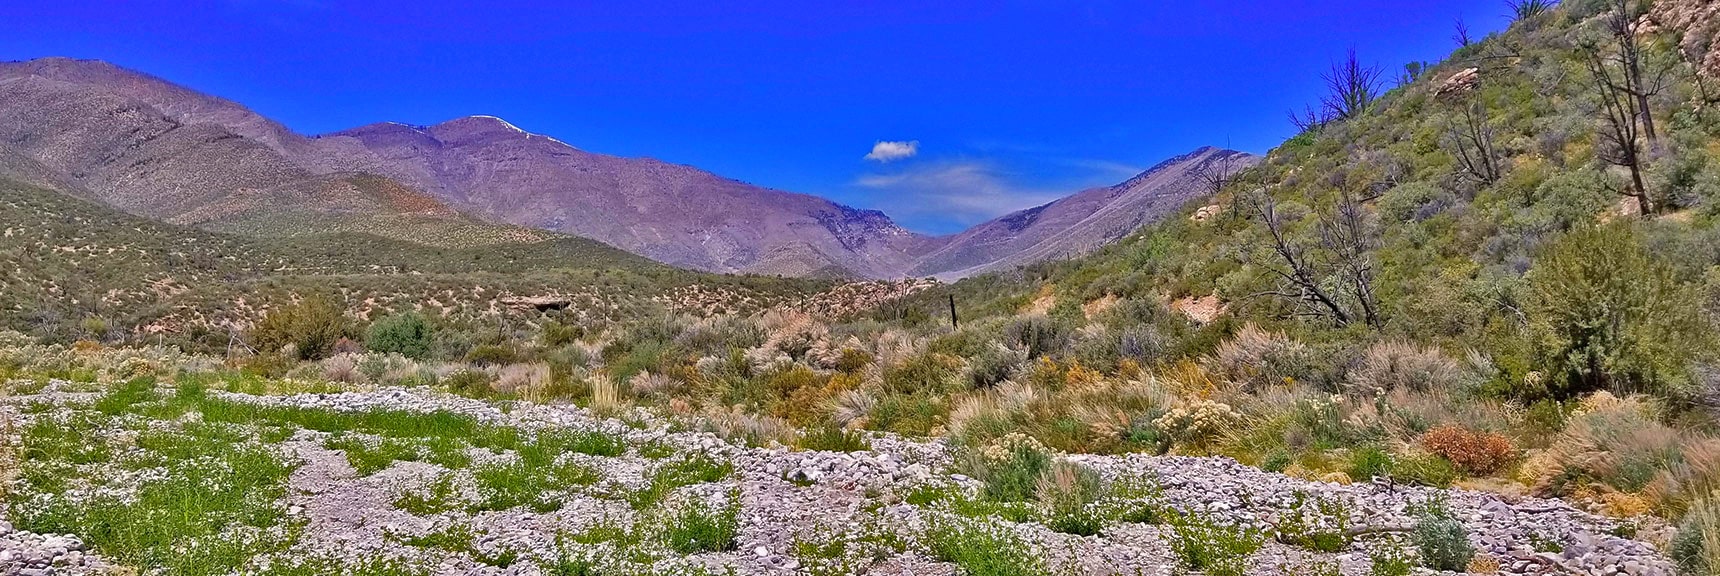 Lovell Canyon | In the Shadow of Griffith Peak and Harris Mountain, Nevada